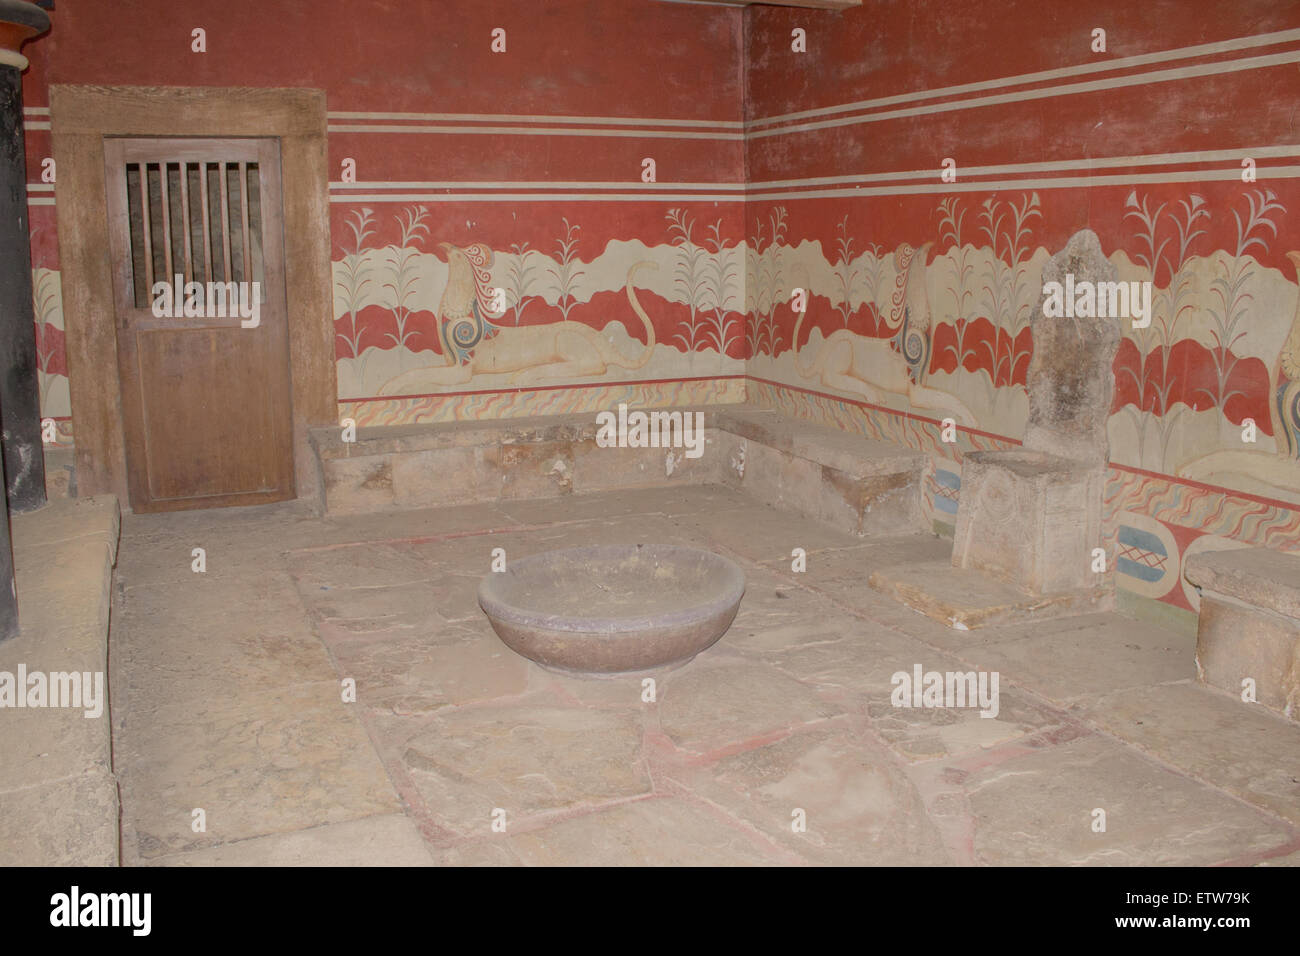 The Throne Room with stone seats and a stone basin that was built for ceremonies at the Knossos Palace, Crete. Stock Photo